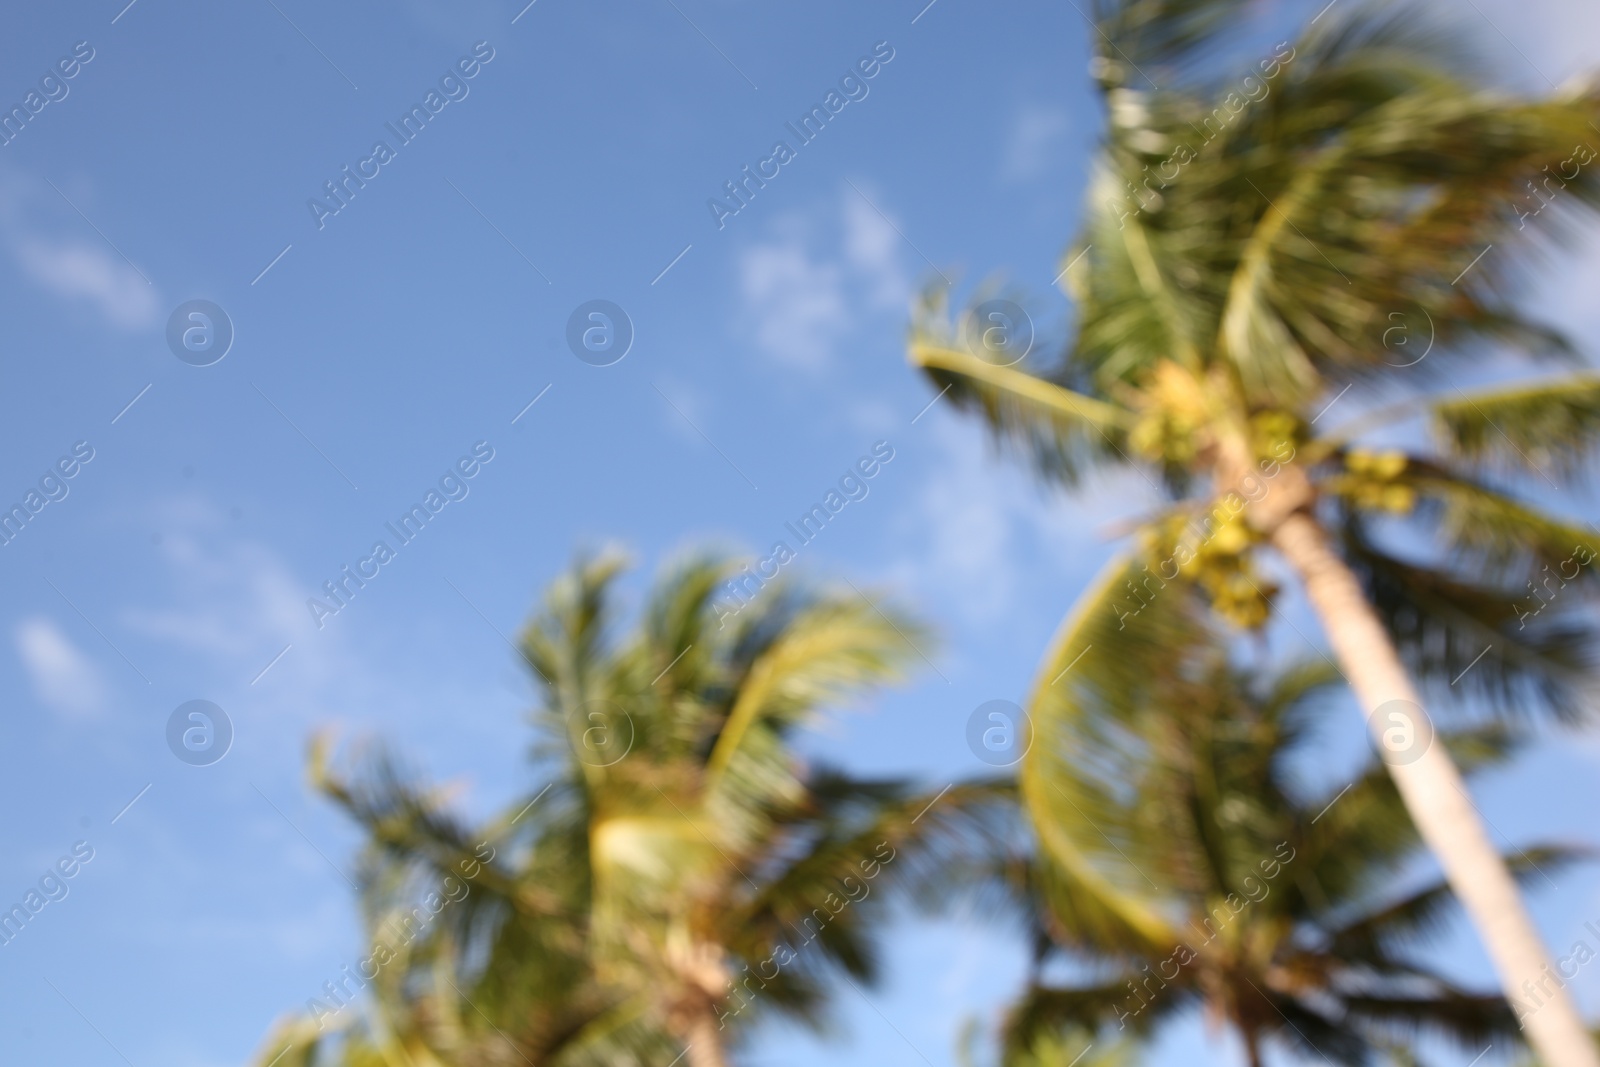 Photo of Blurred view of beautiful palm trees on sunny day